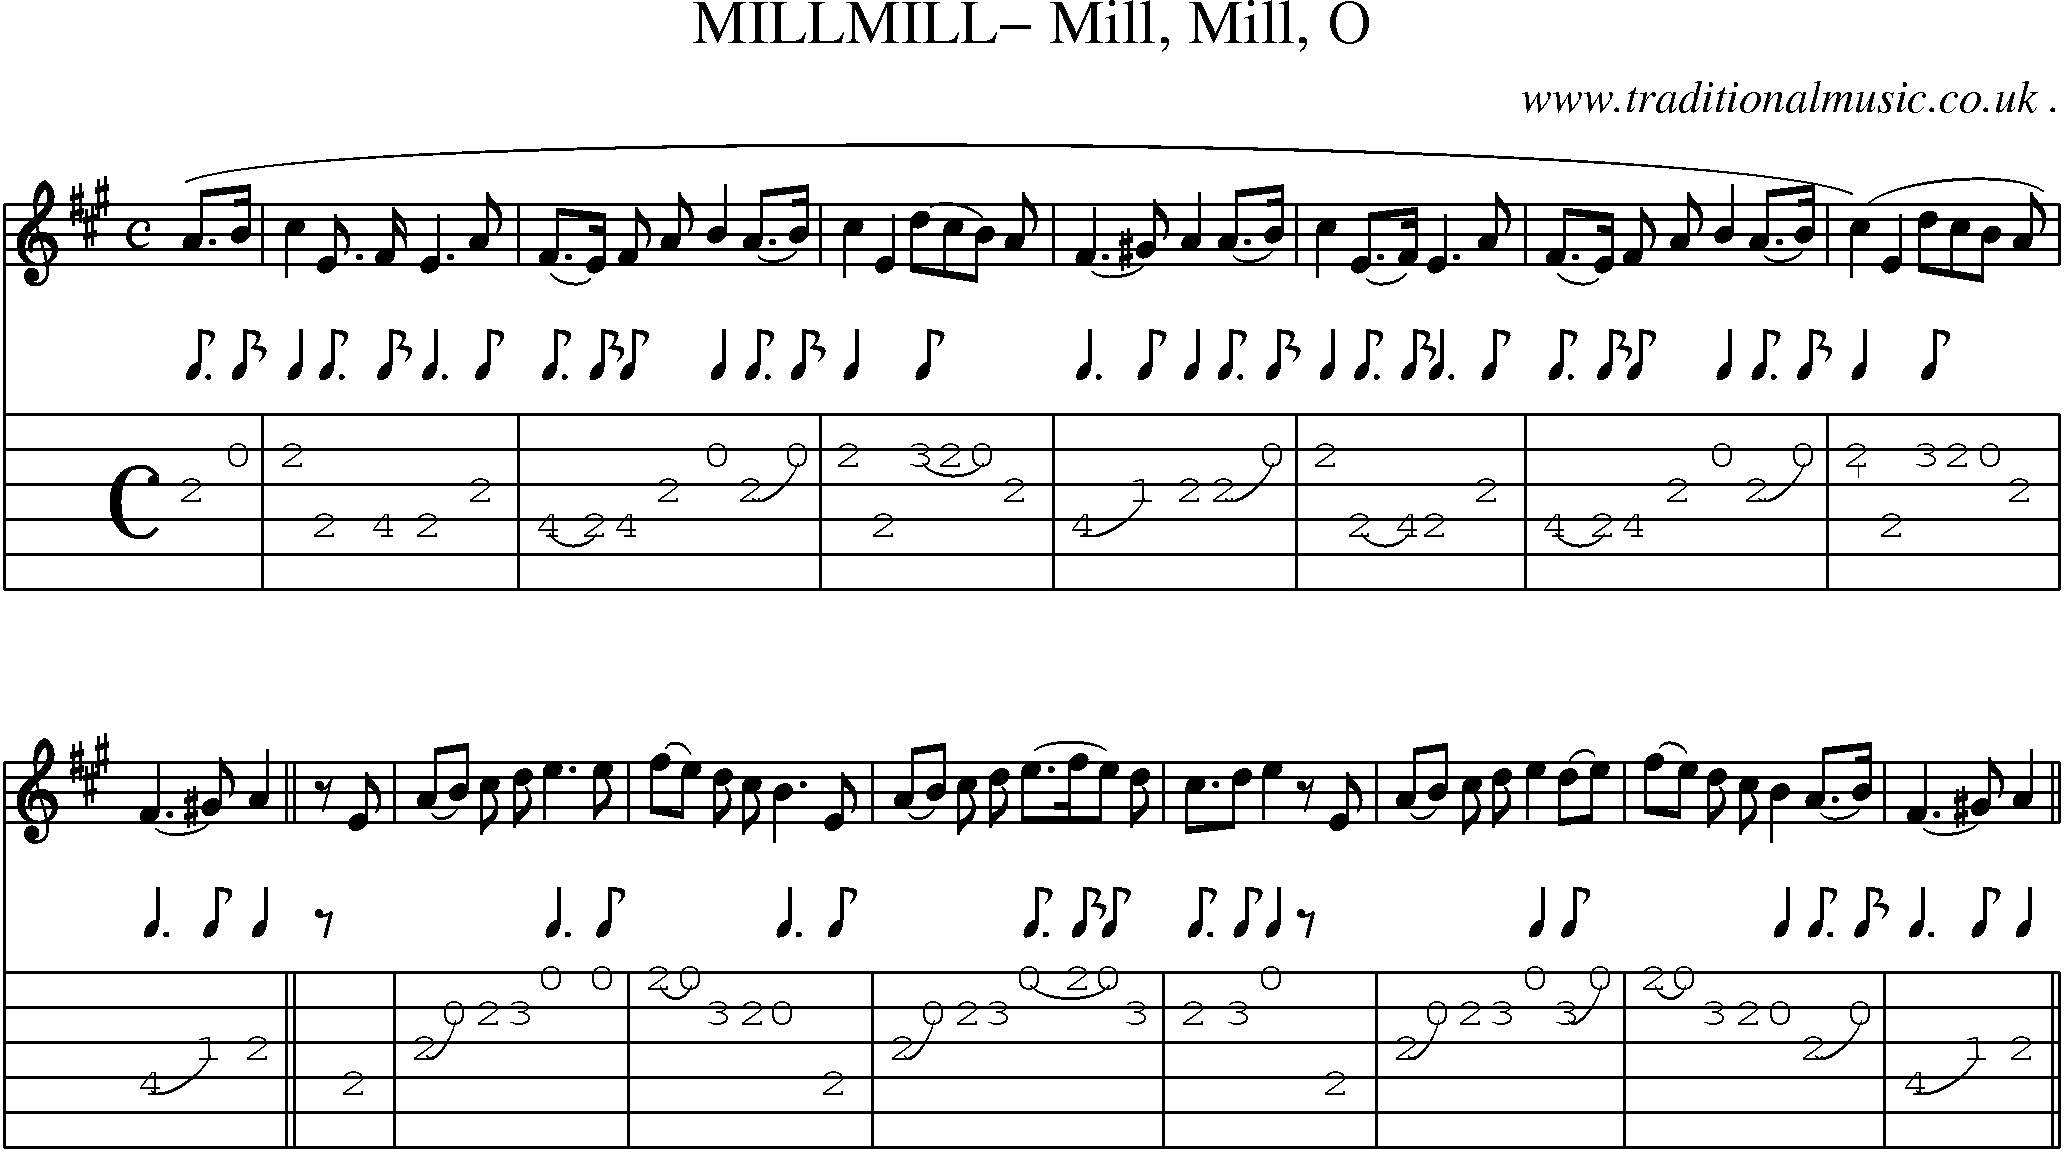 Sheet-Music and Guitar Tabs for Millmill Mill Mill O